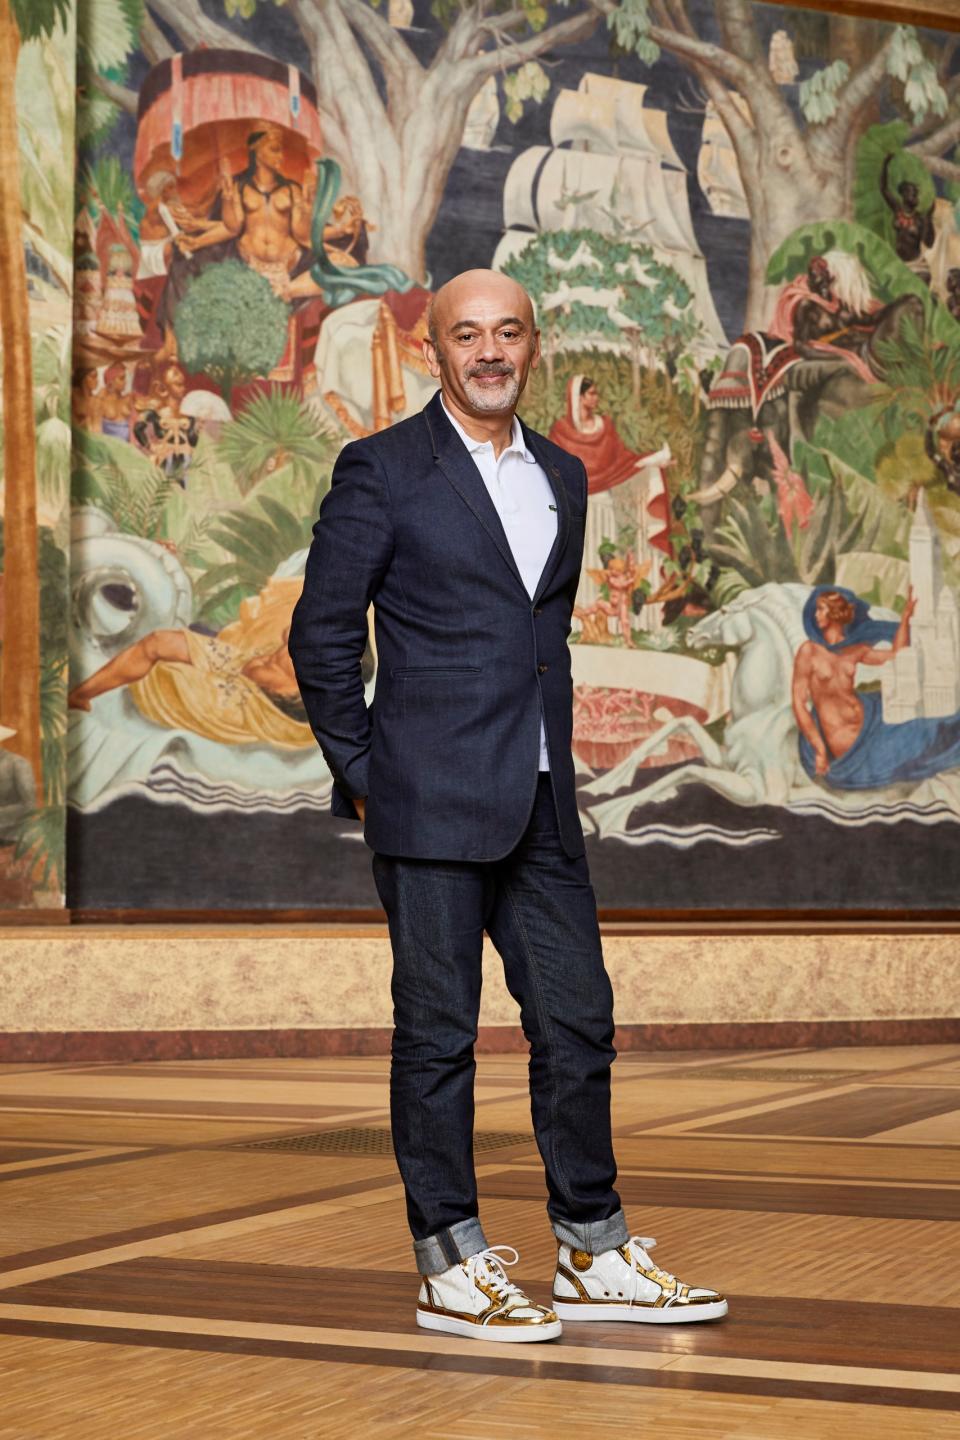 Designer Christian Louboutin dressed in blazer, jeans and sneakers, standing in front of a wall size piece of art.